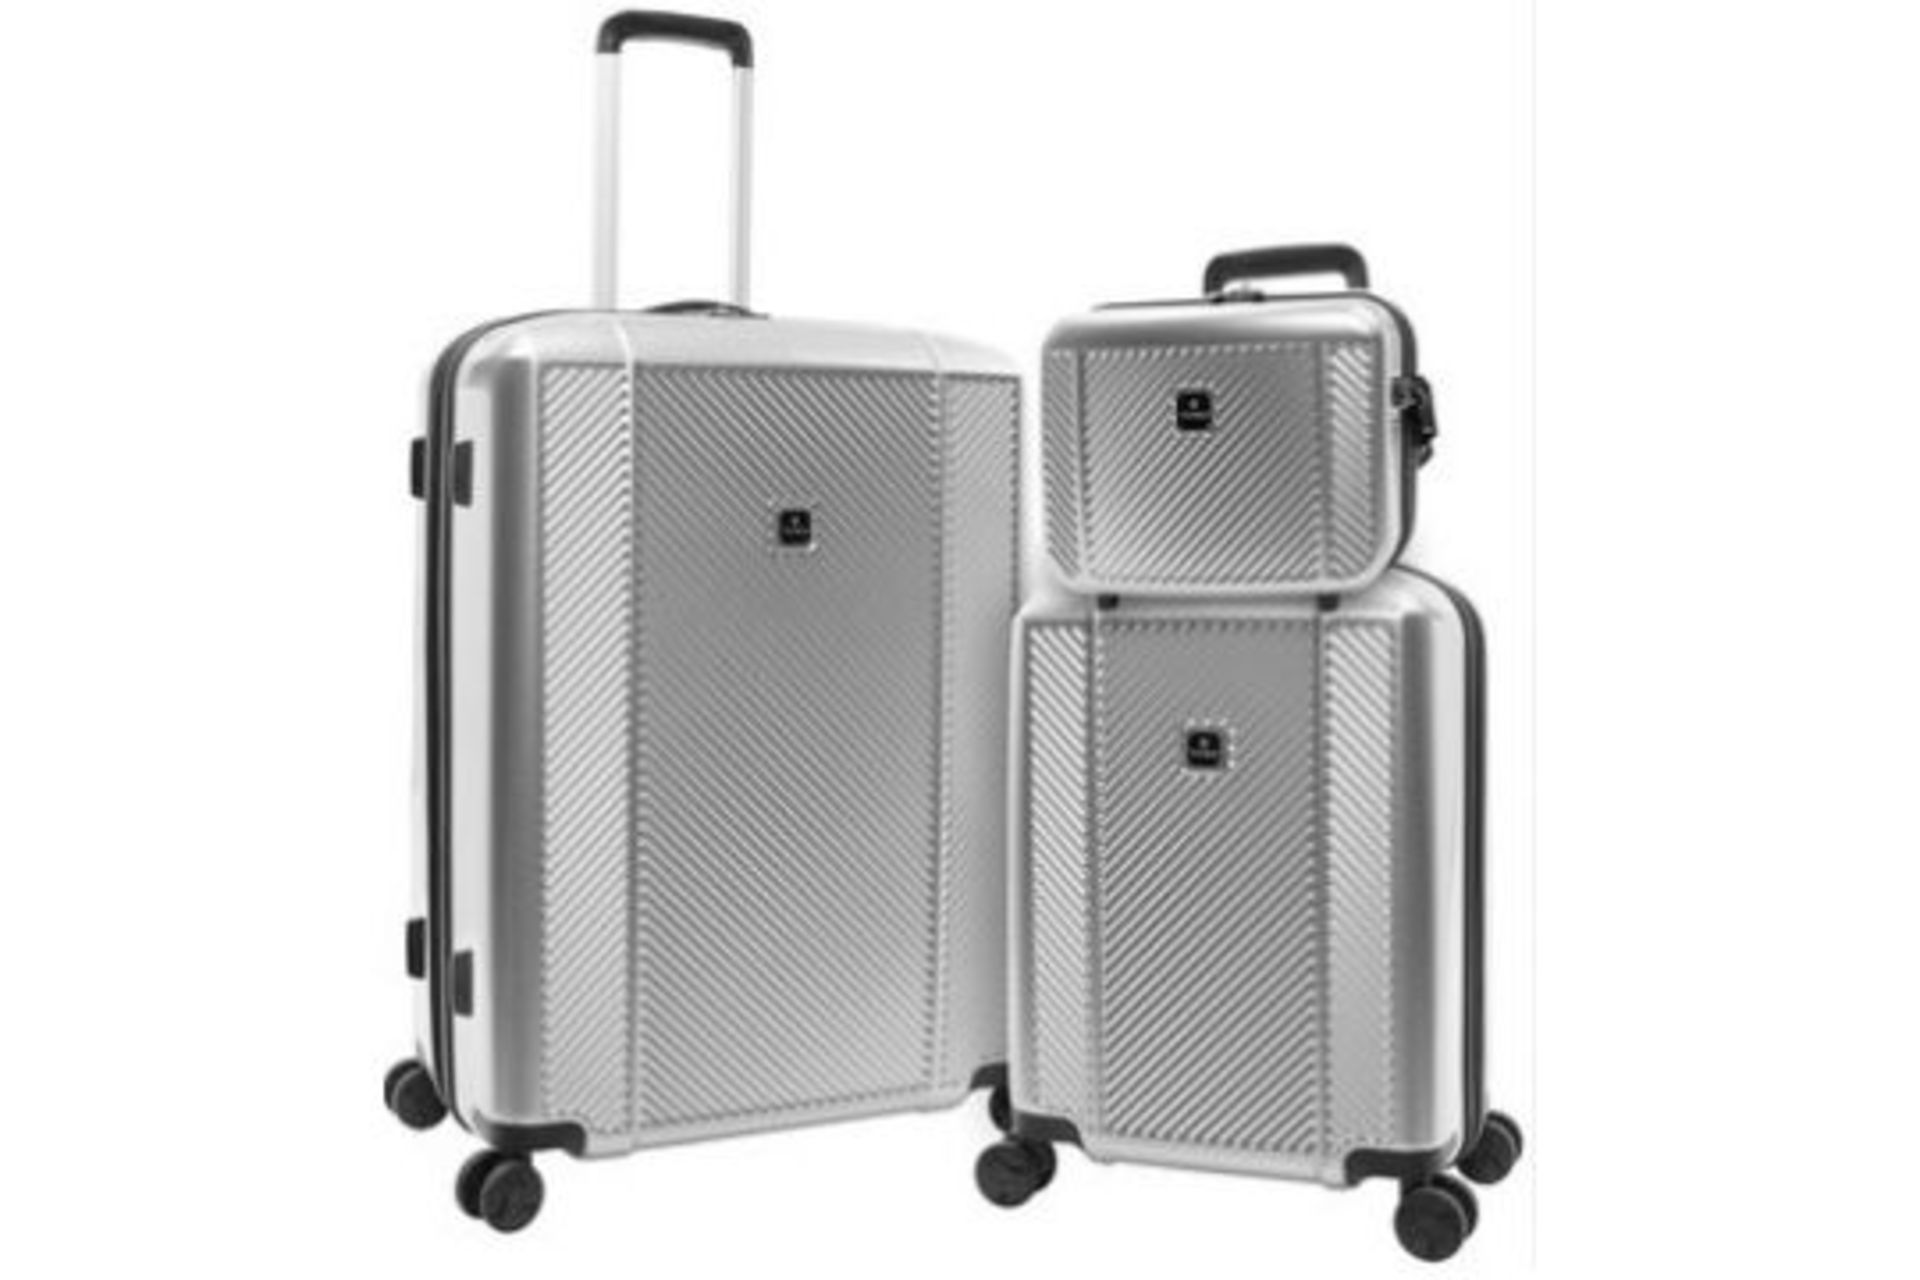 3 x New Boxed 3 Piece Sets of TAG Spectrum Hardside Luggage Set. (SILVER). RRP £199.99 per set. - Image 2 of 3